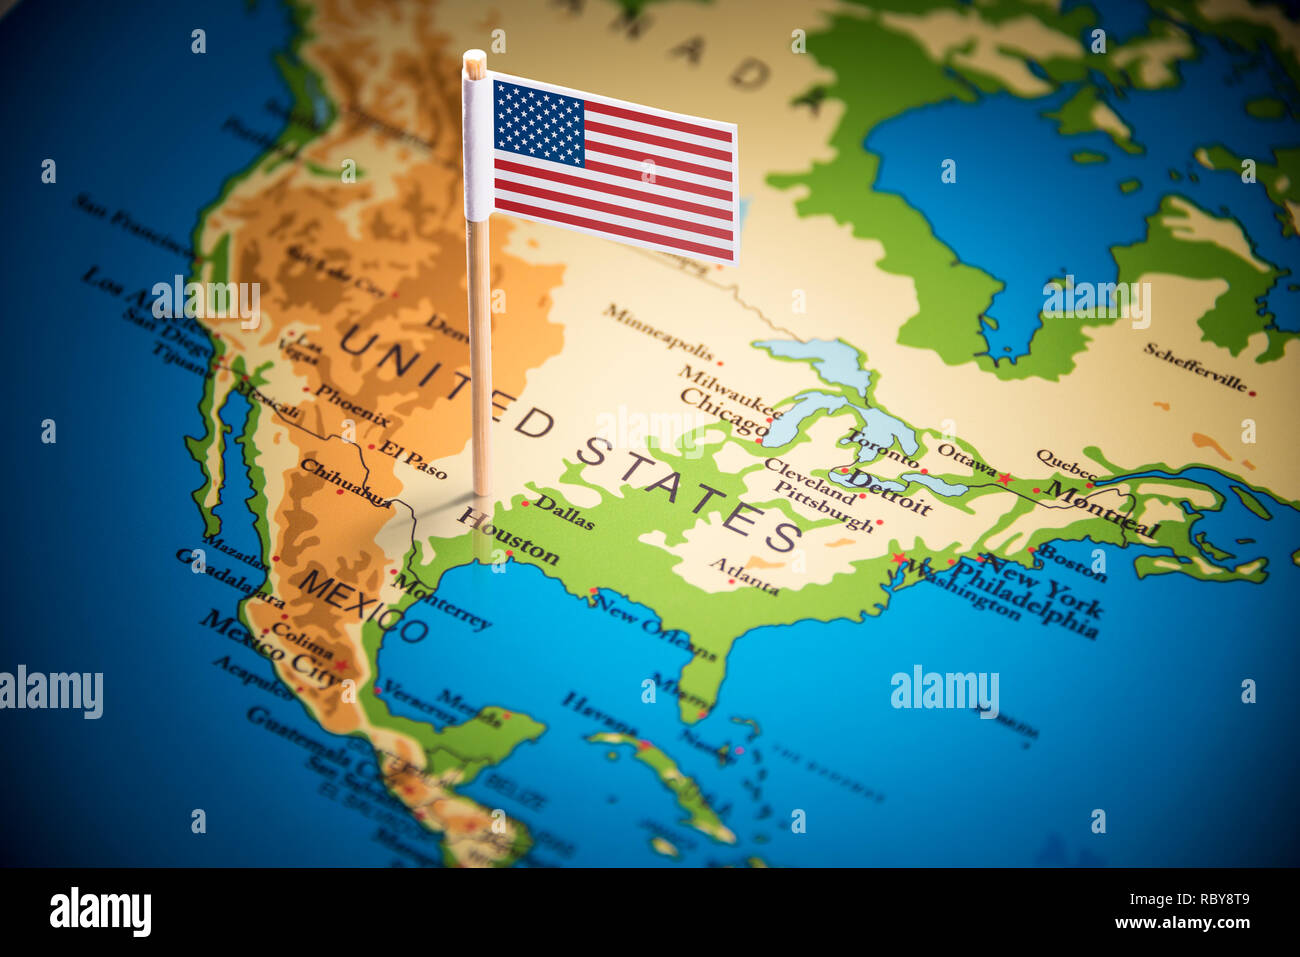 USA marked with a flag on the map Stock Photo